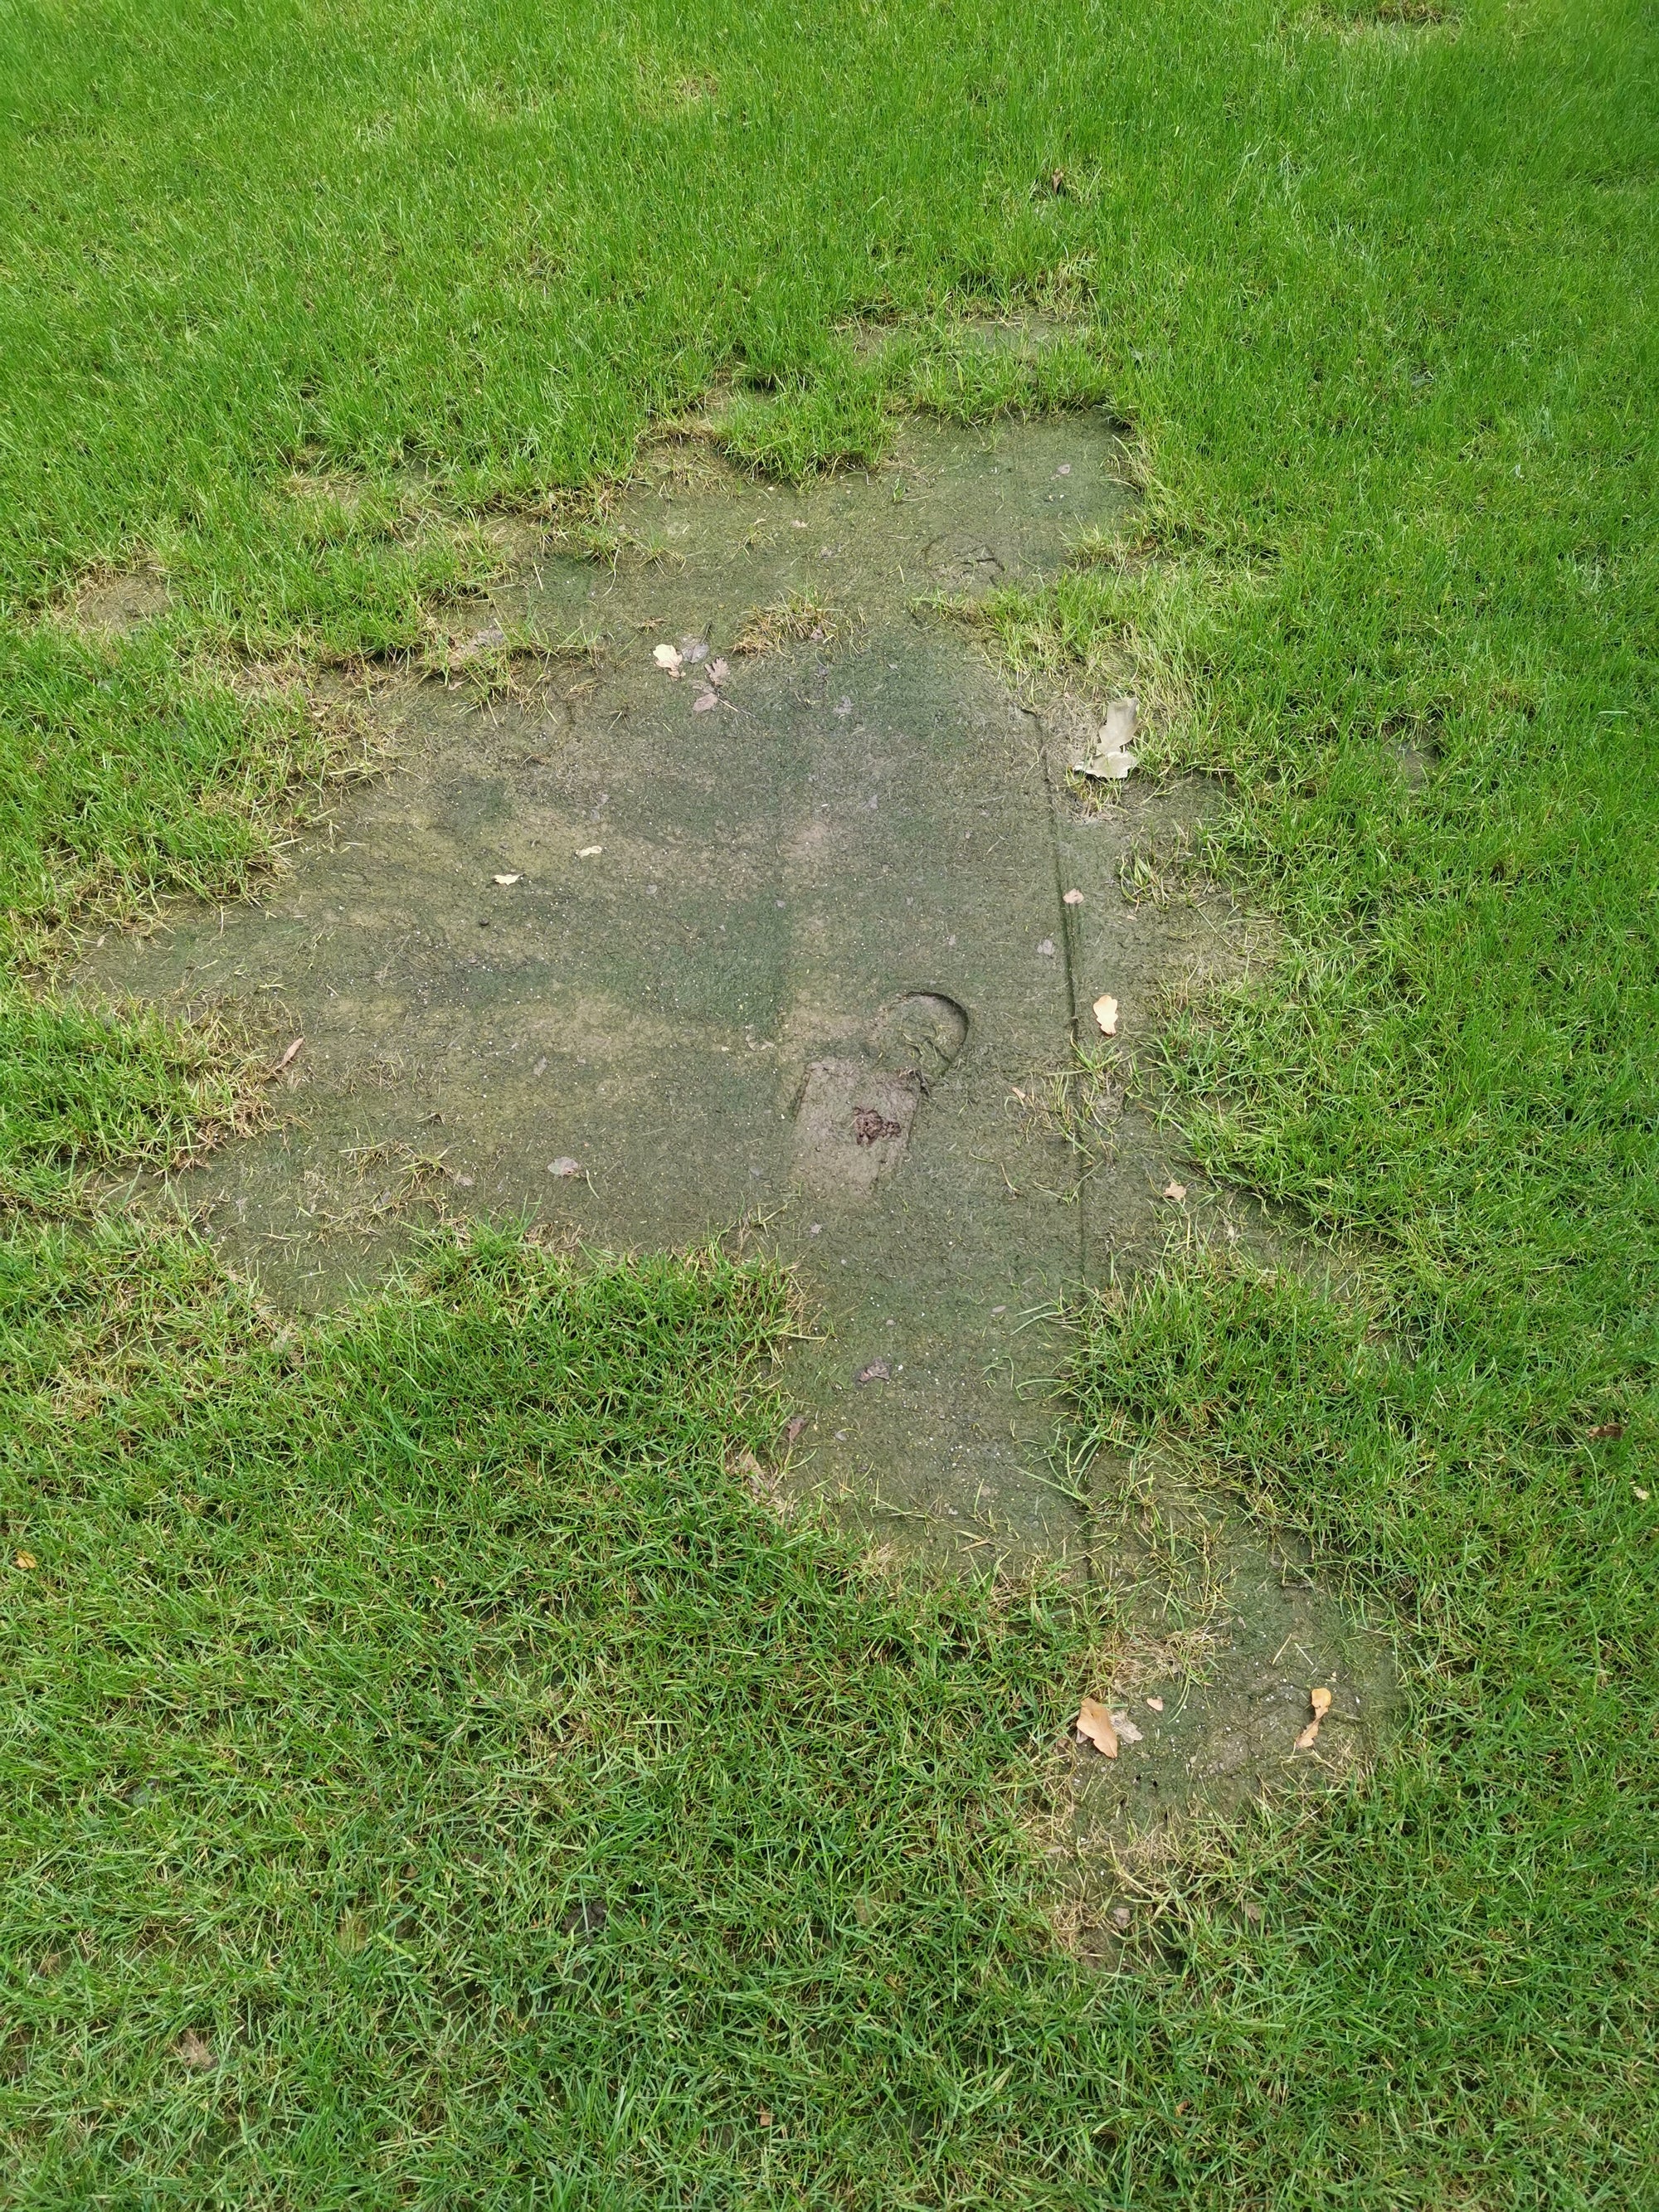 What causes brown patches in lawns